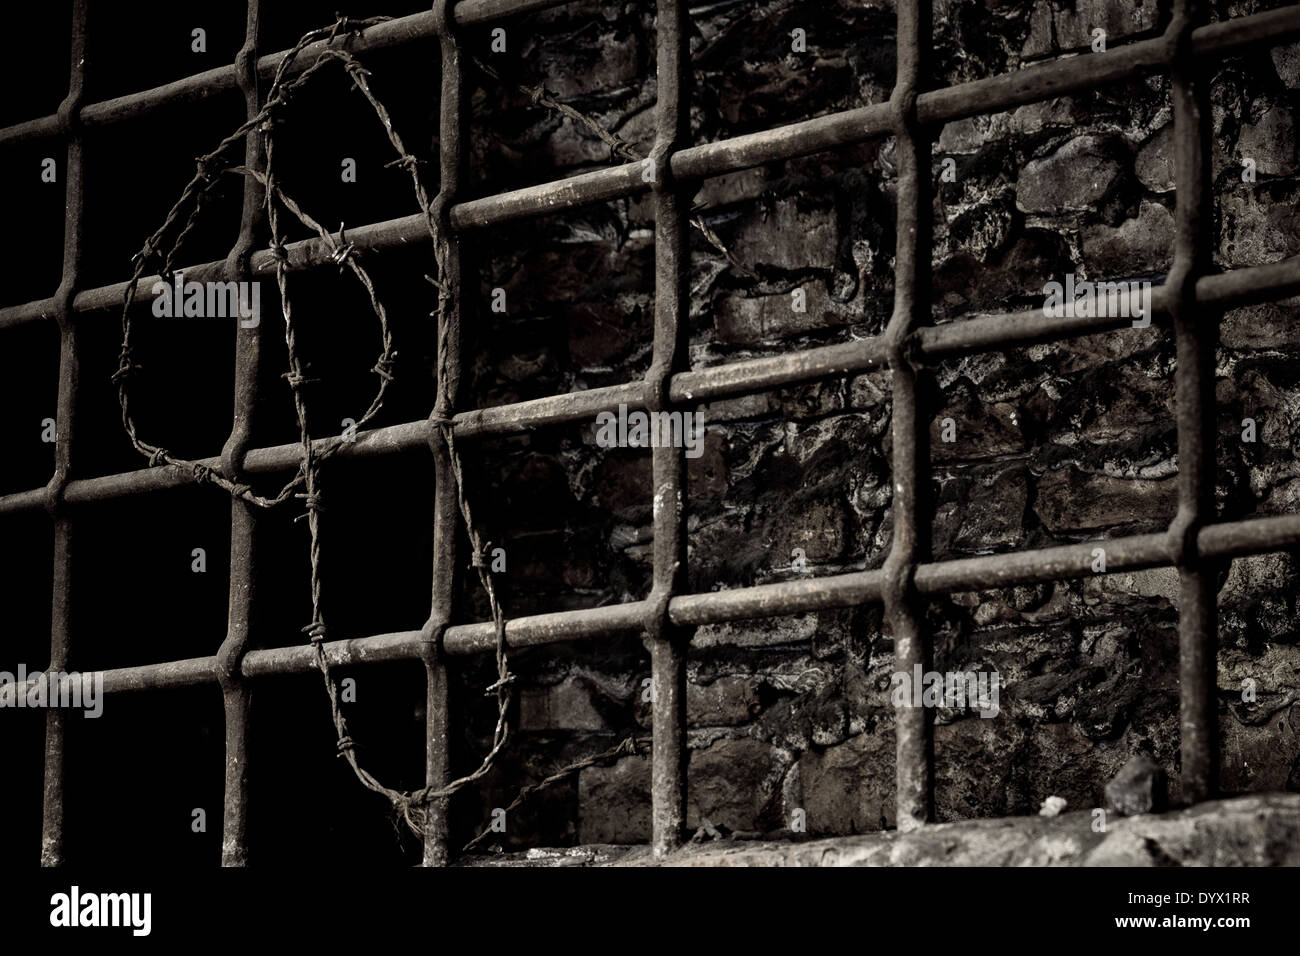 Burned up prison cell with barbed wire Stock Photo